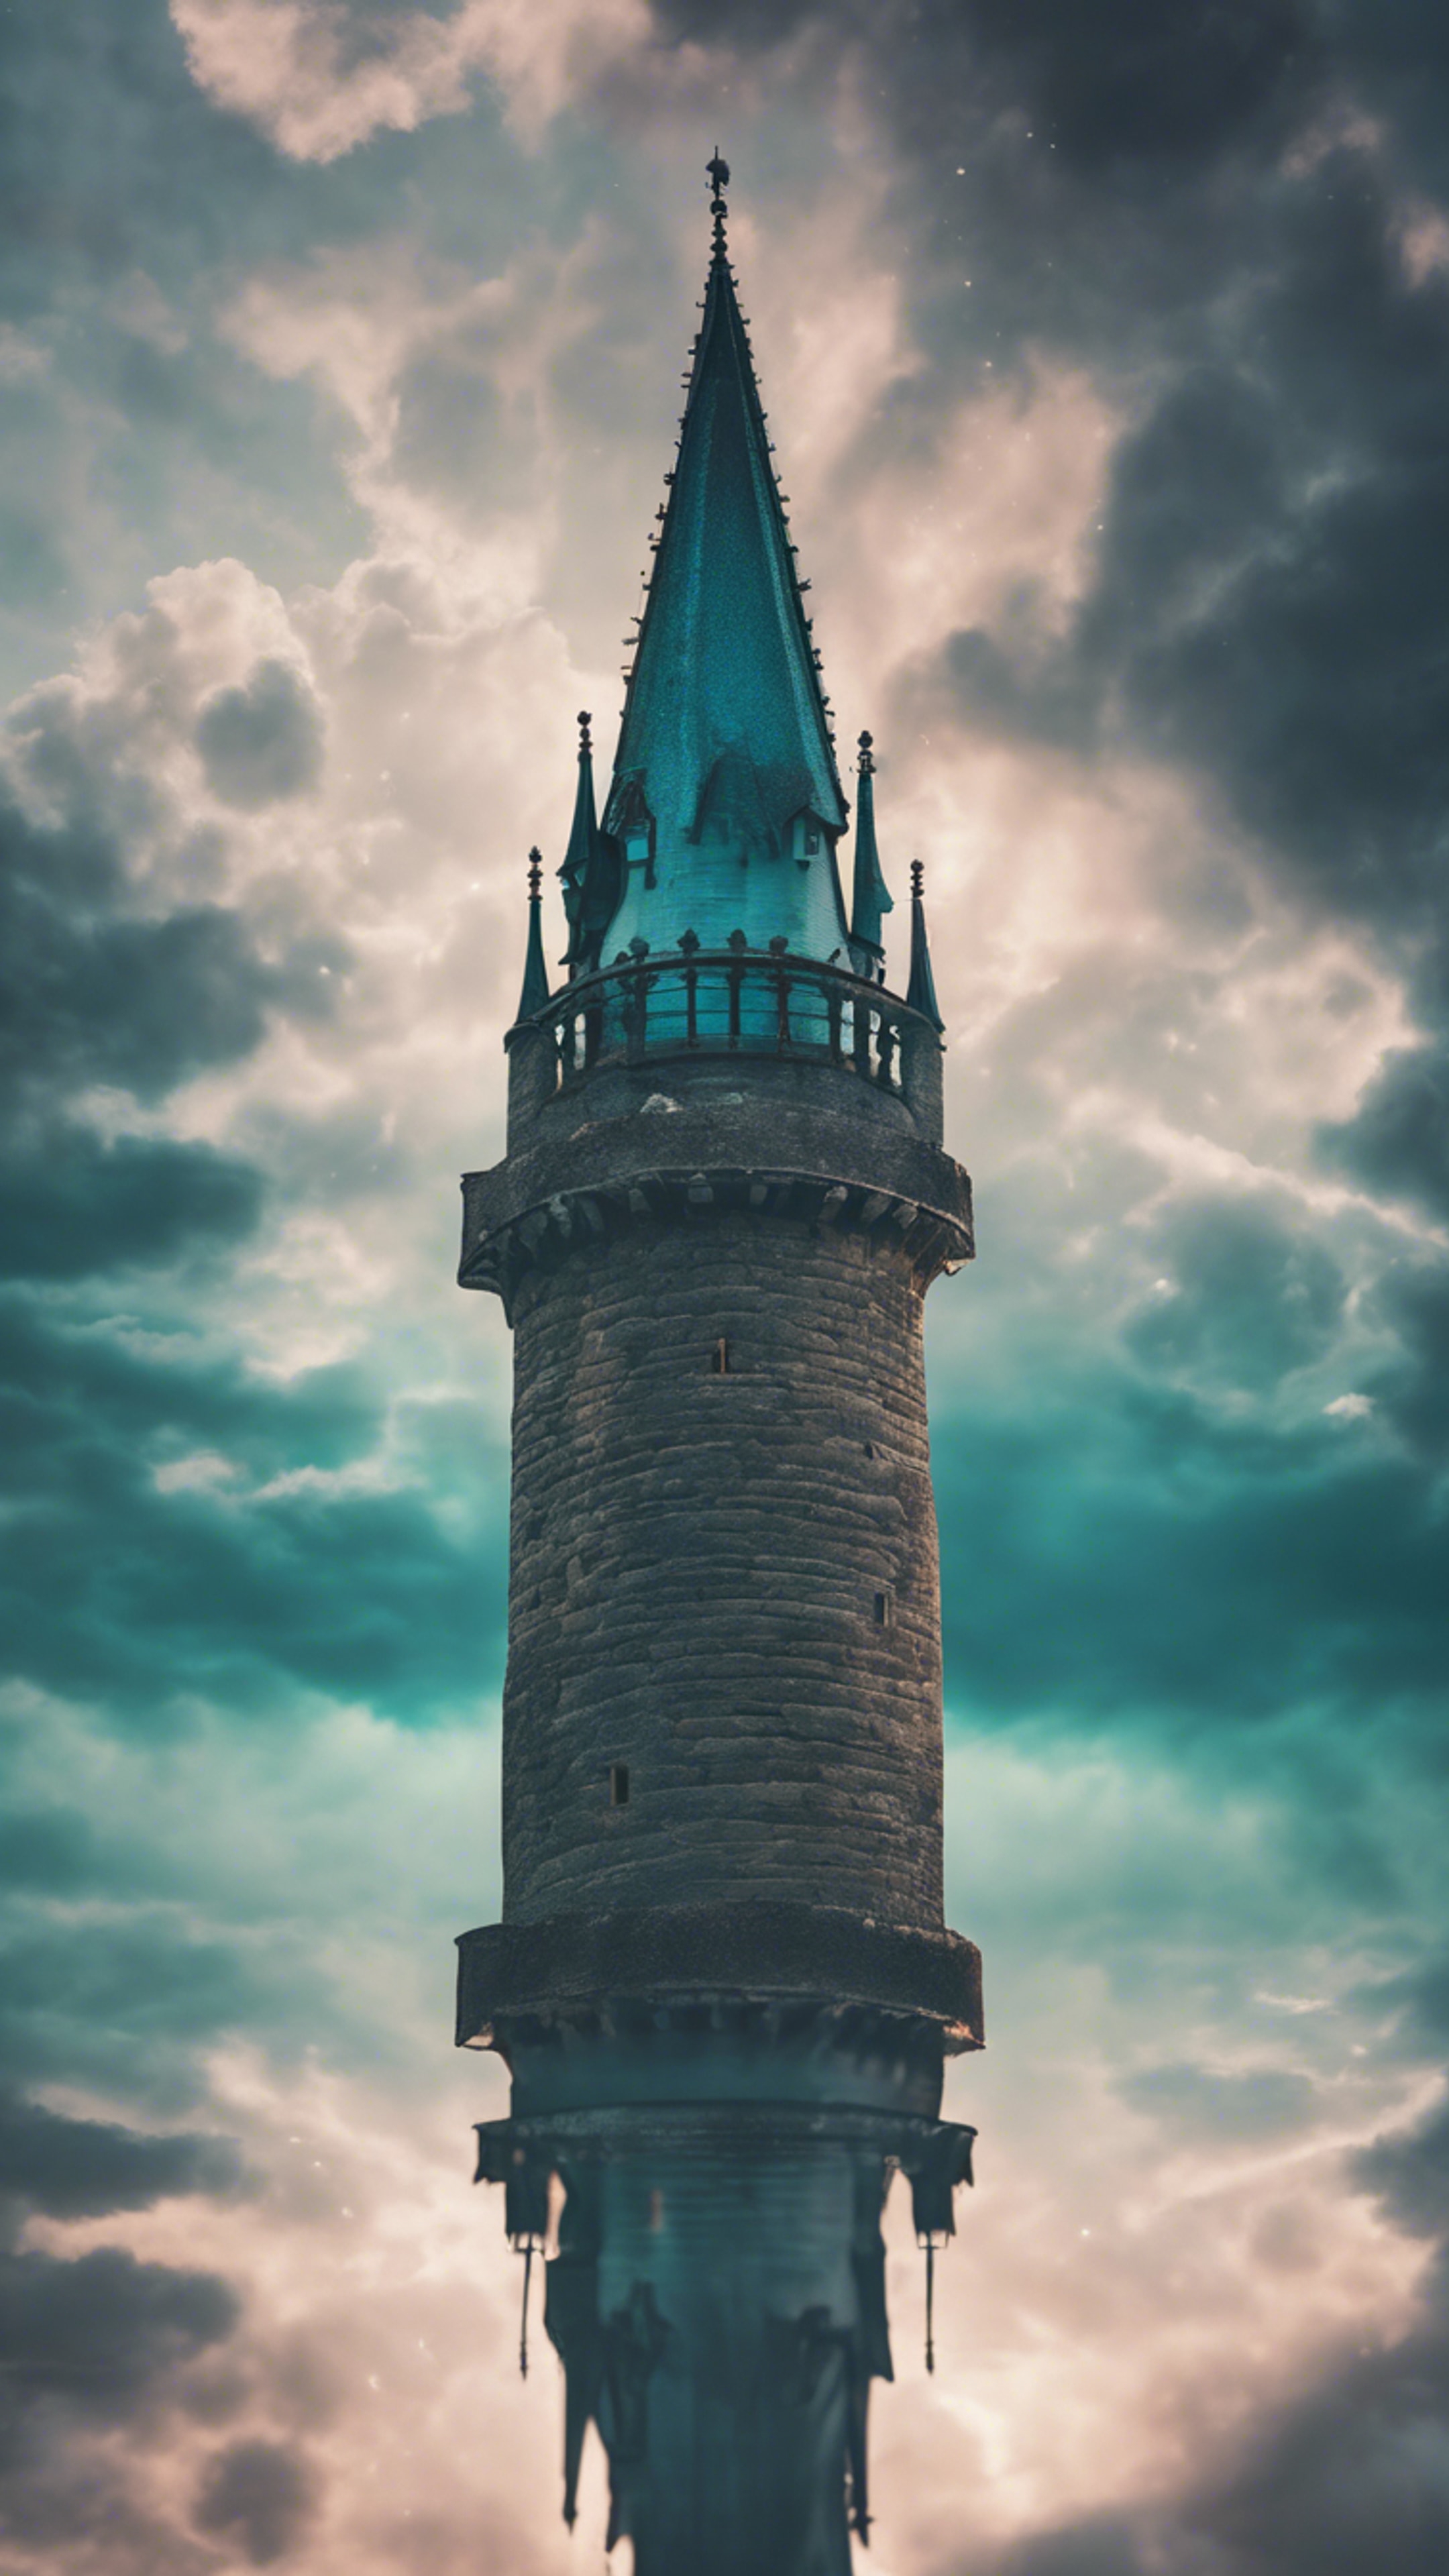 A Gothic castle tower reaching into the clouds, lit from within by mystery teal lights. Hintergrund[95b6d3de171842619bd4]